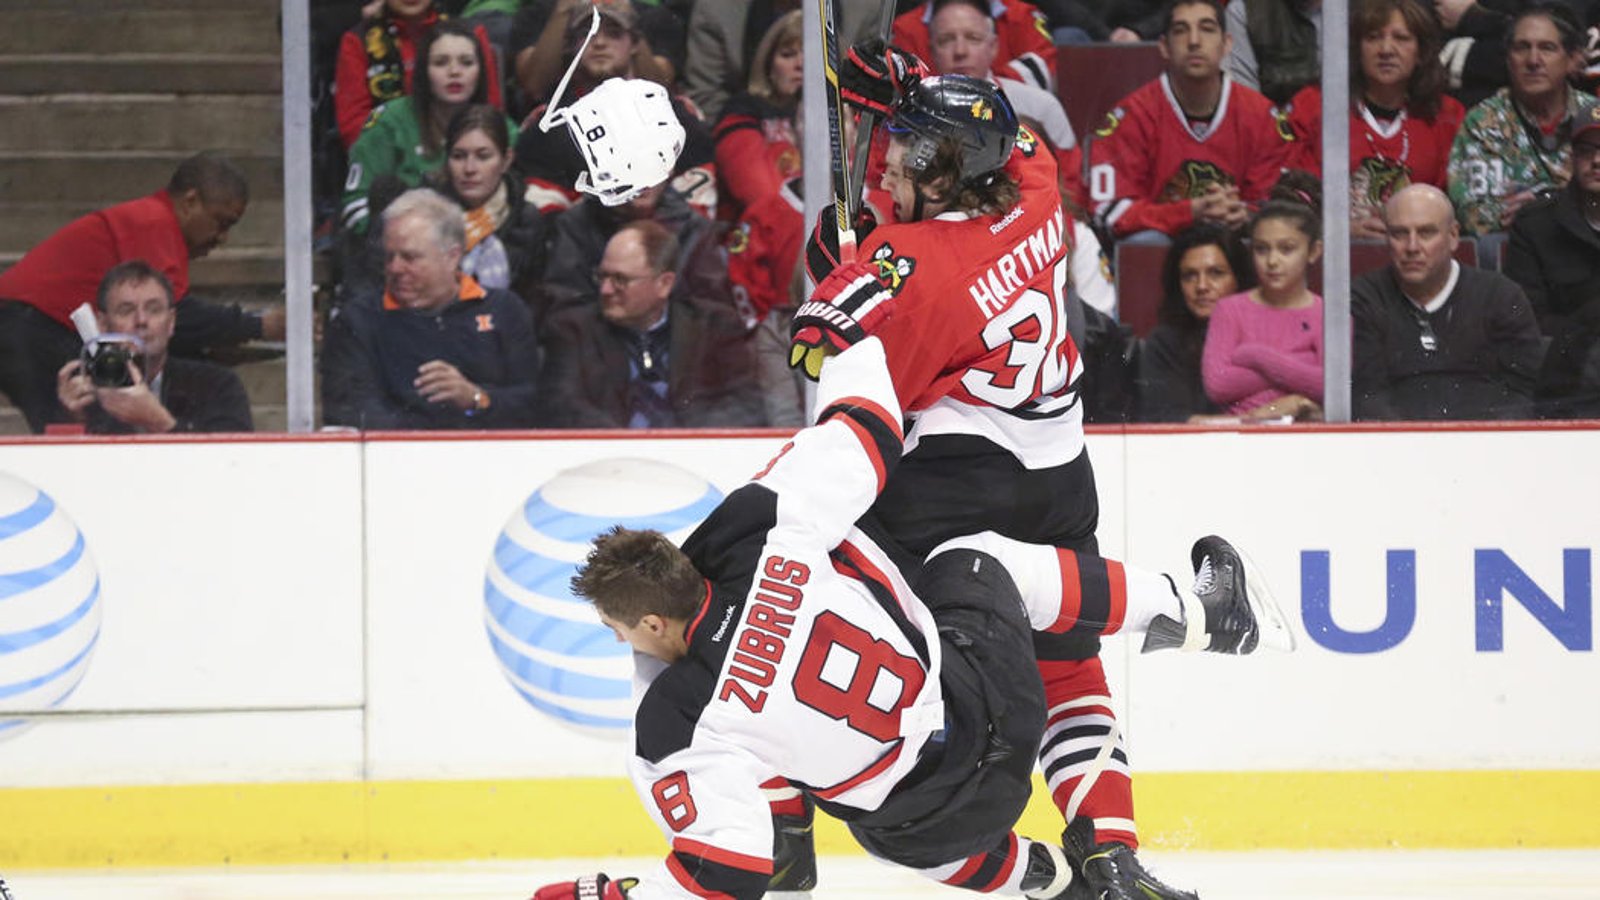 REWIND:Blackhawks player levels his opponent with open ice hit